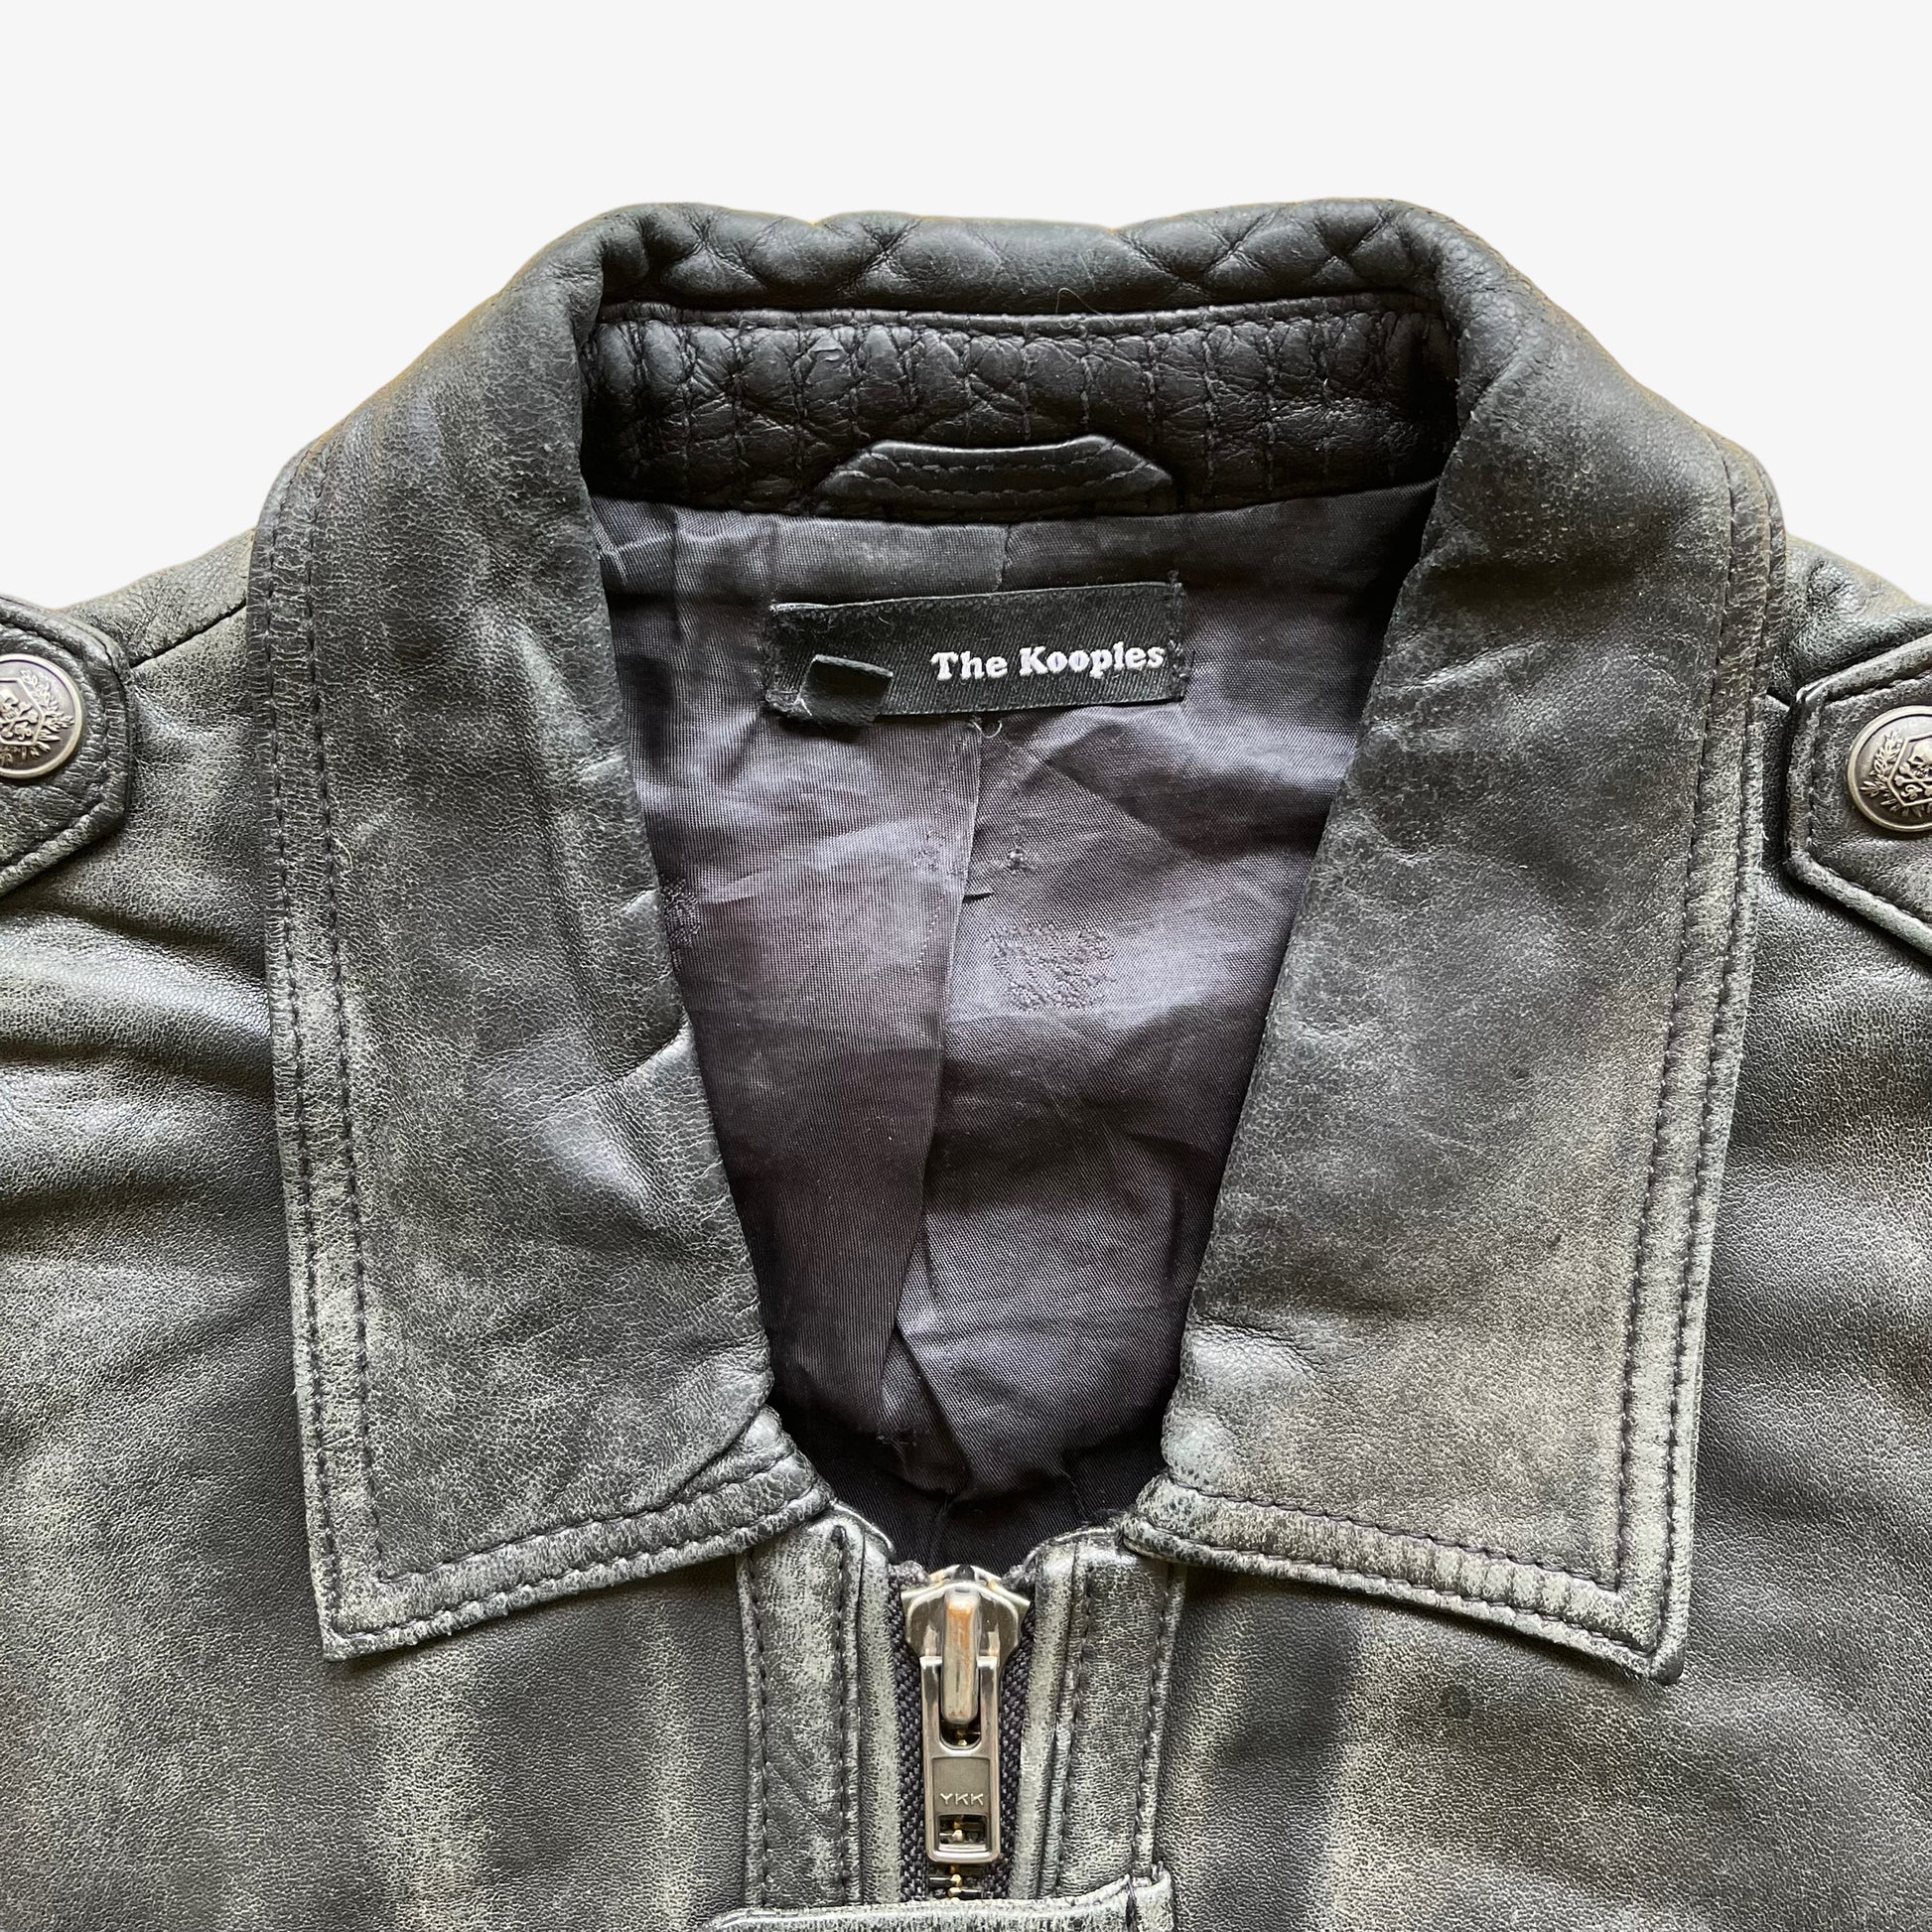 The Kooples Black Leather Driving Jacket Label - Casspios Dream